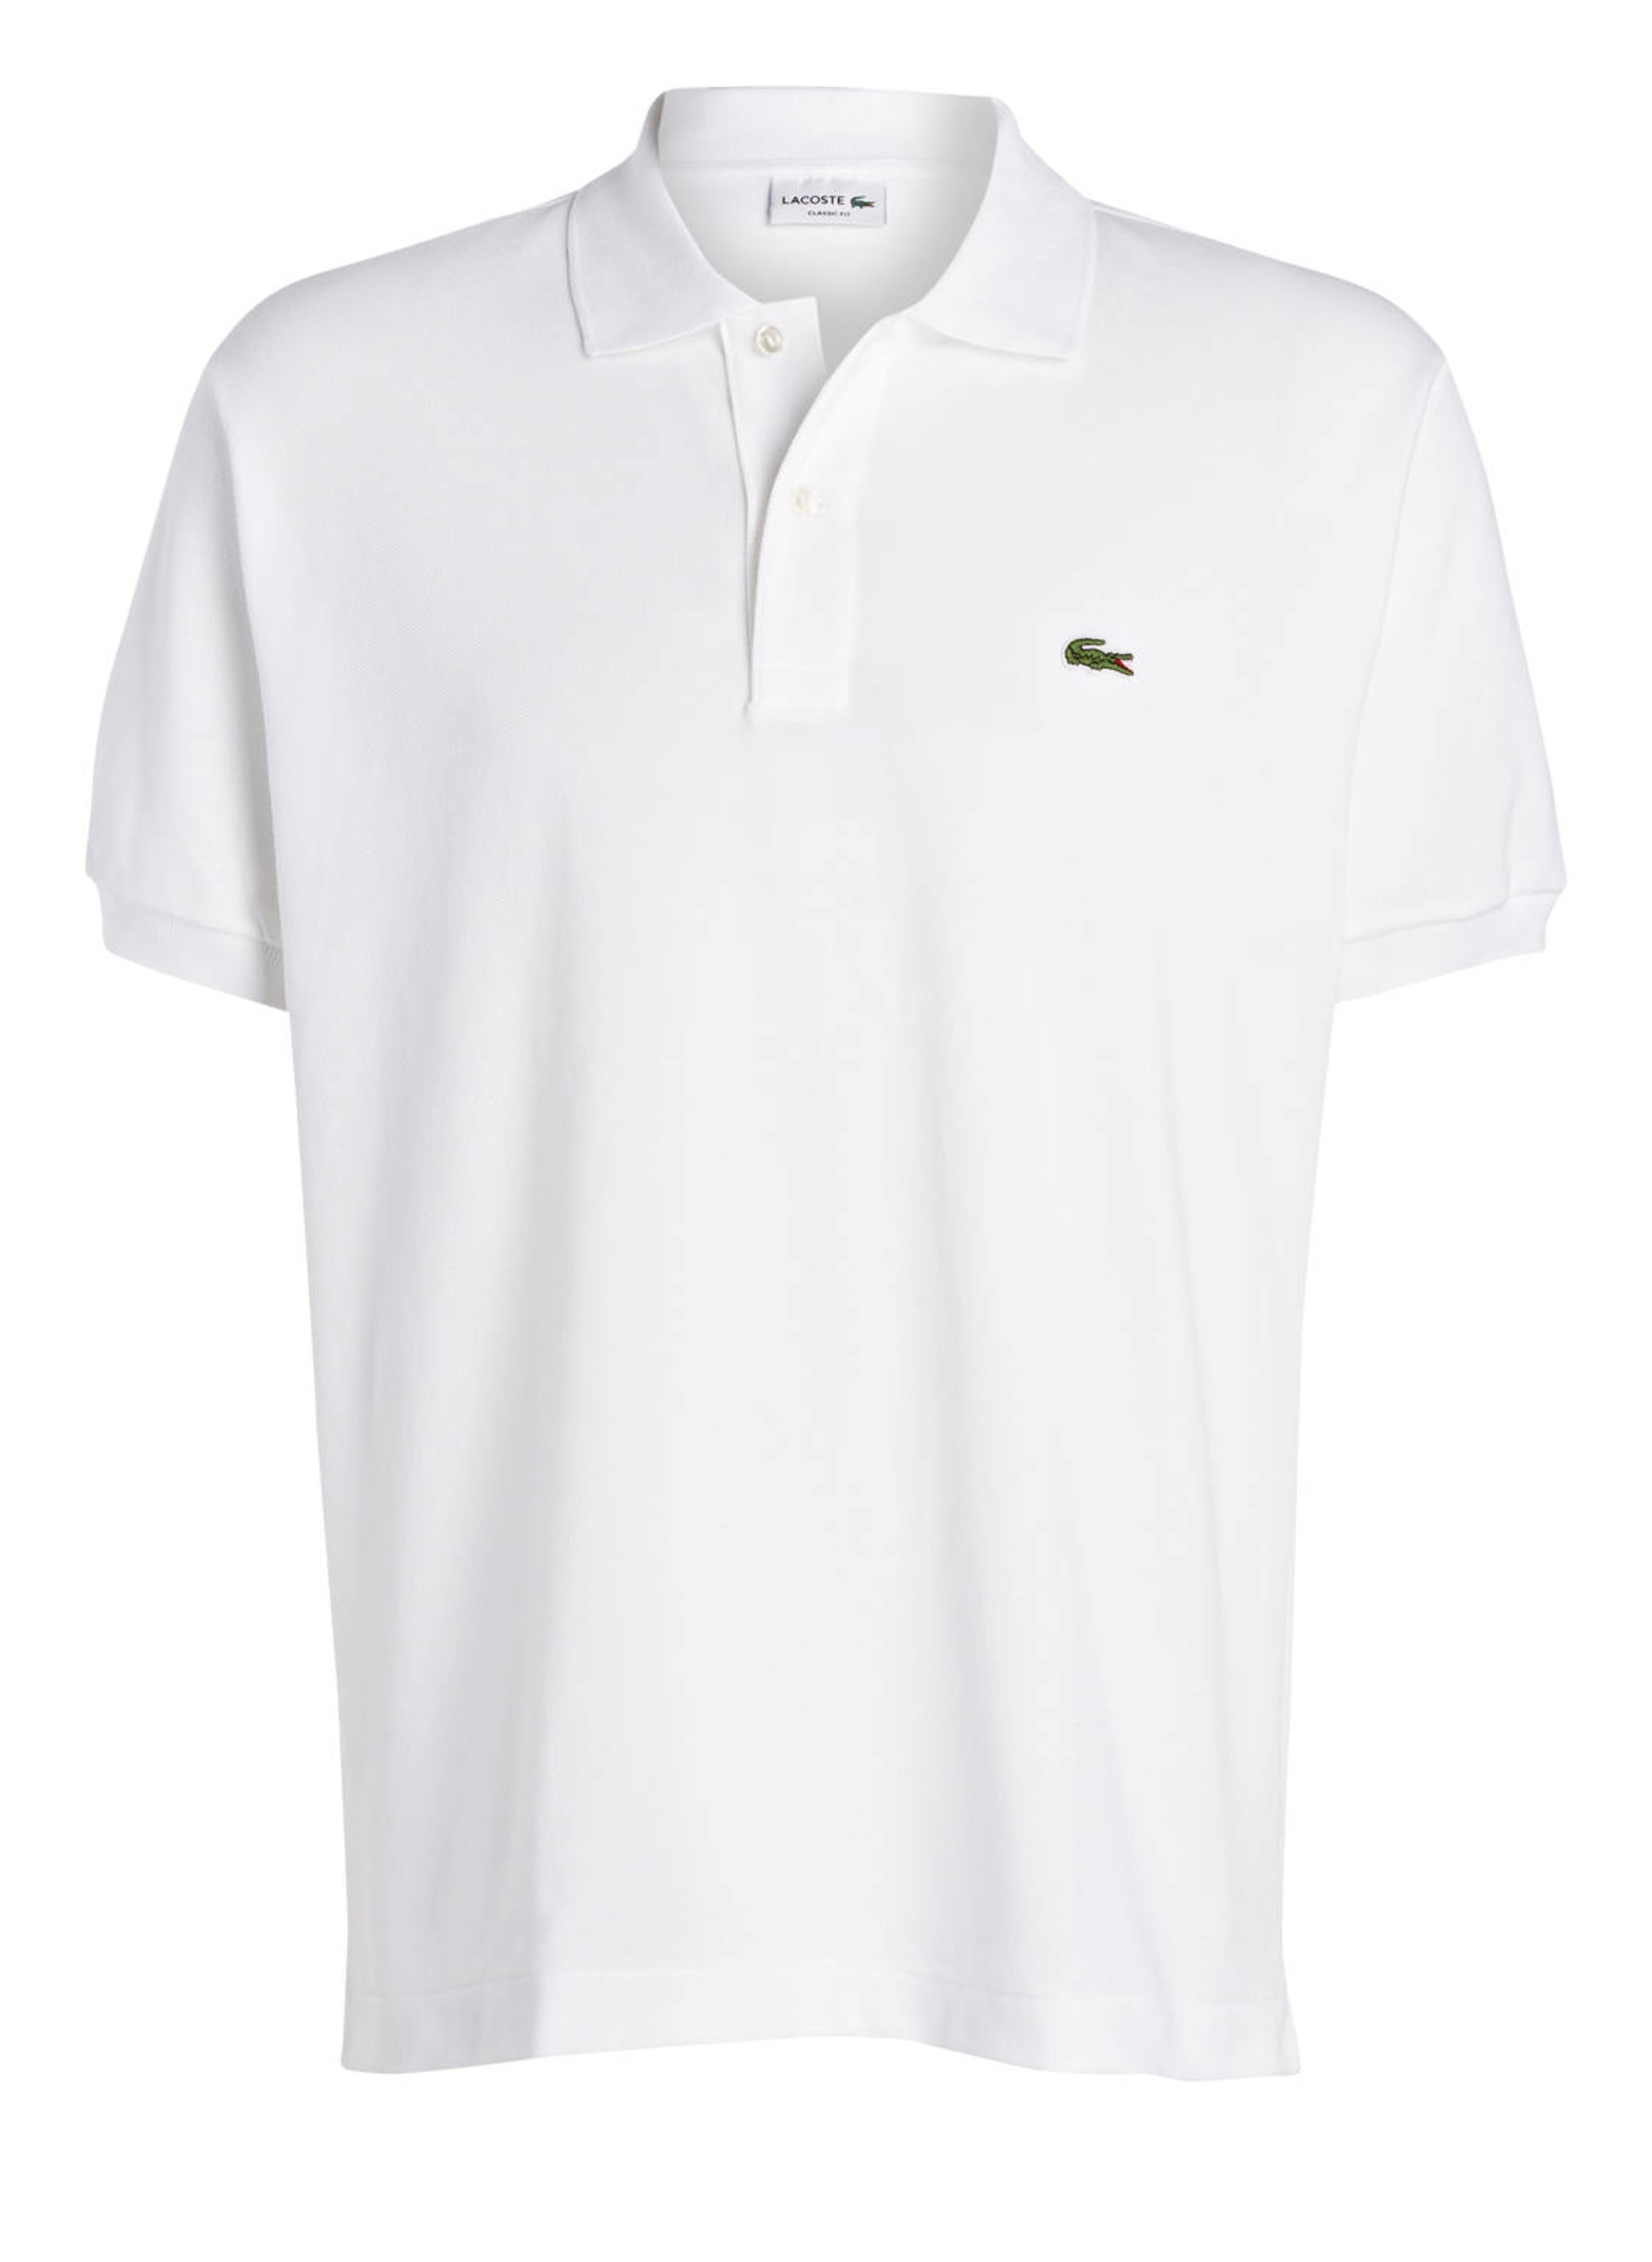 LACOSTE Piqué-Poloshirt Classic weiss in Fit